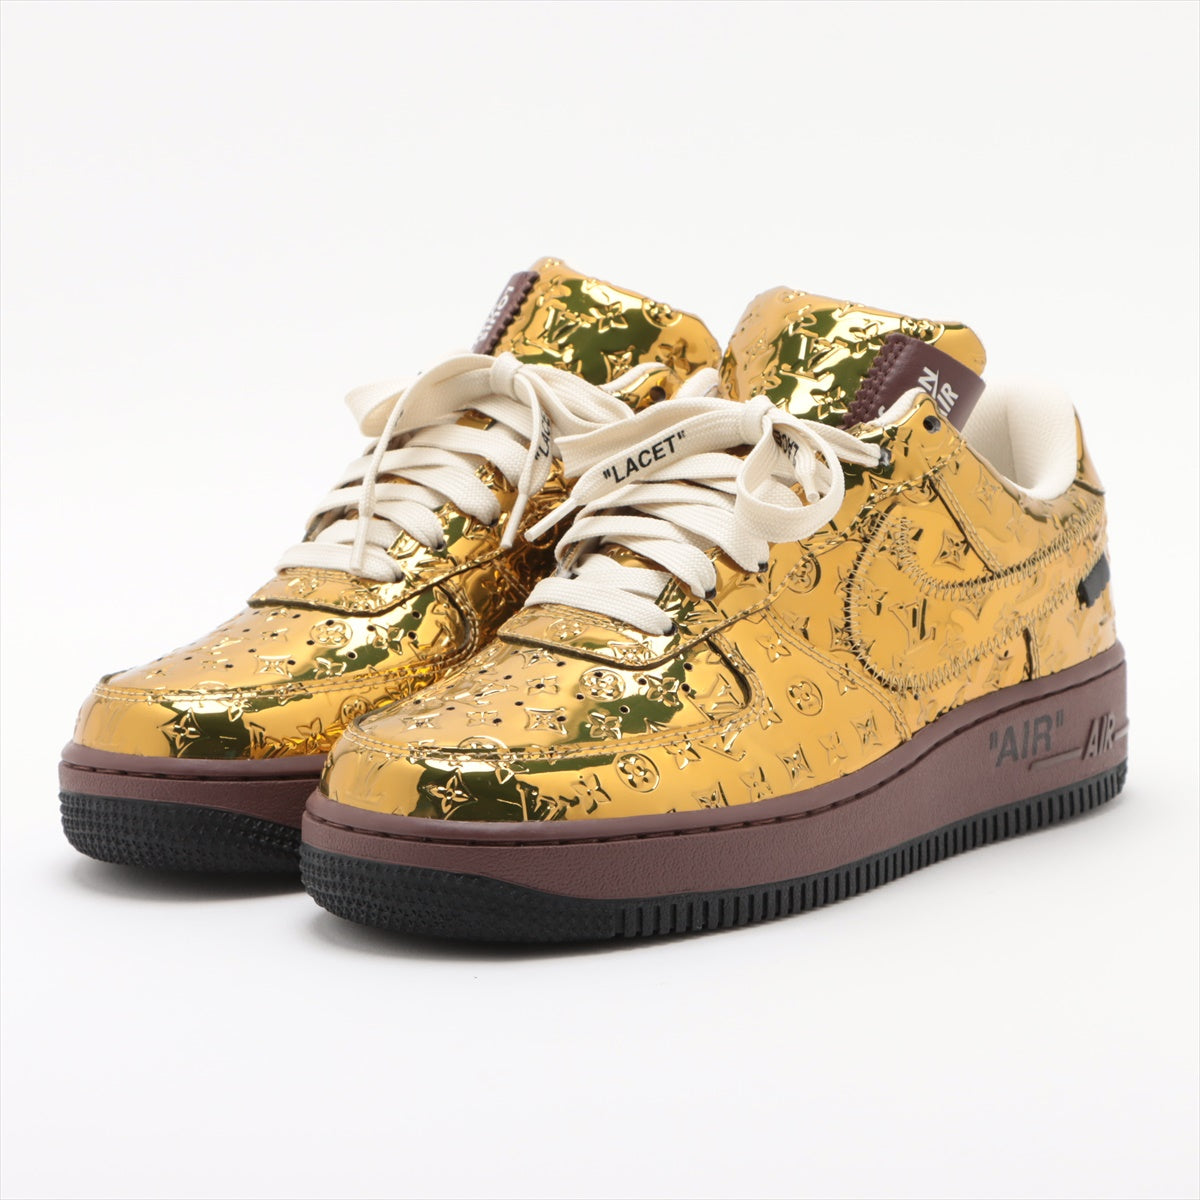 Louis Vuitton x Nike 22 years Patent leather Sneakers 6 Men's Gold LD0222 Air Force 1 Low By Virgil Abloh box sack Is there a replacement string